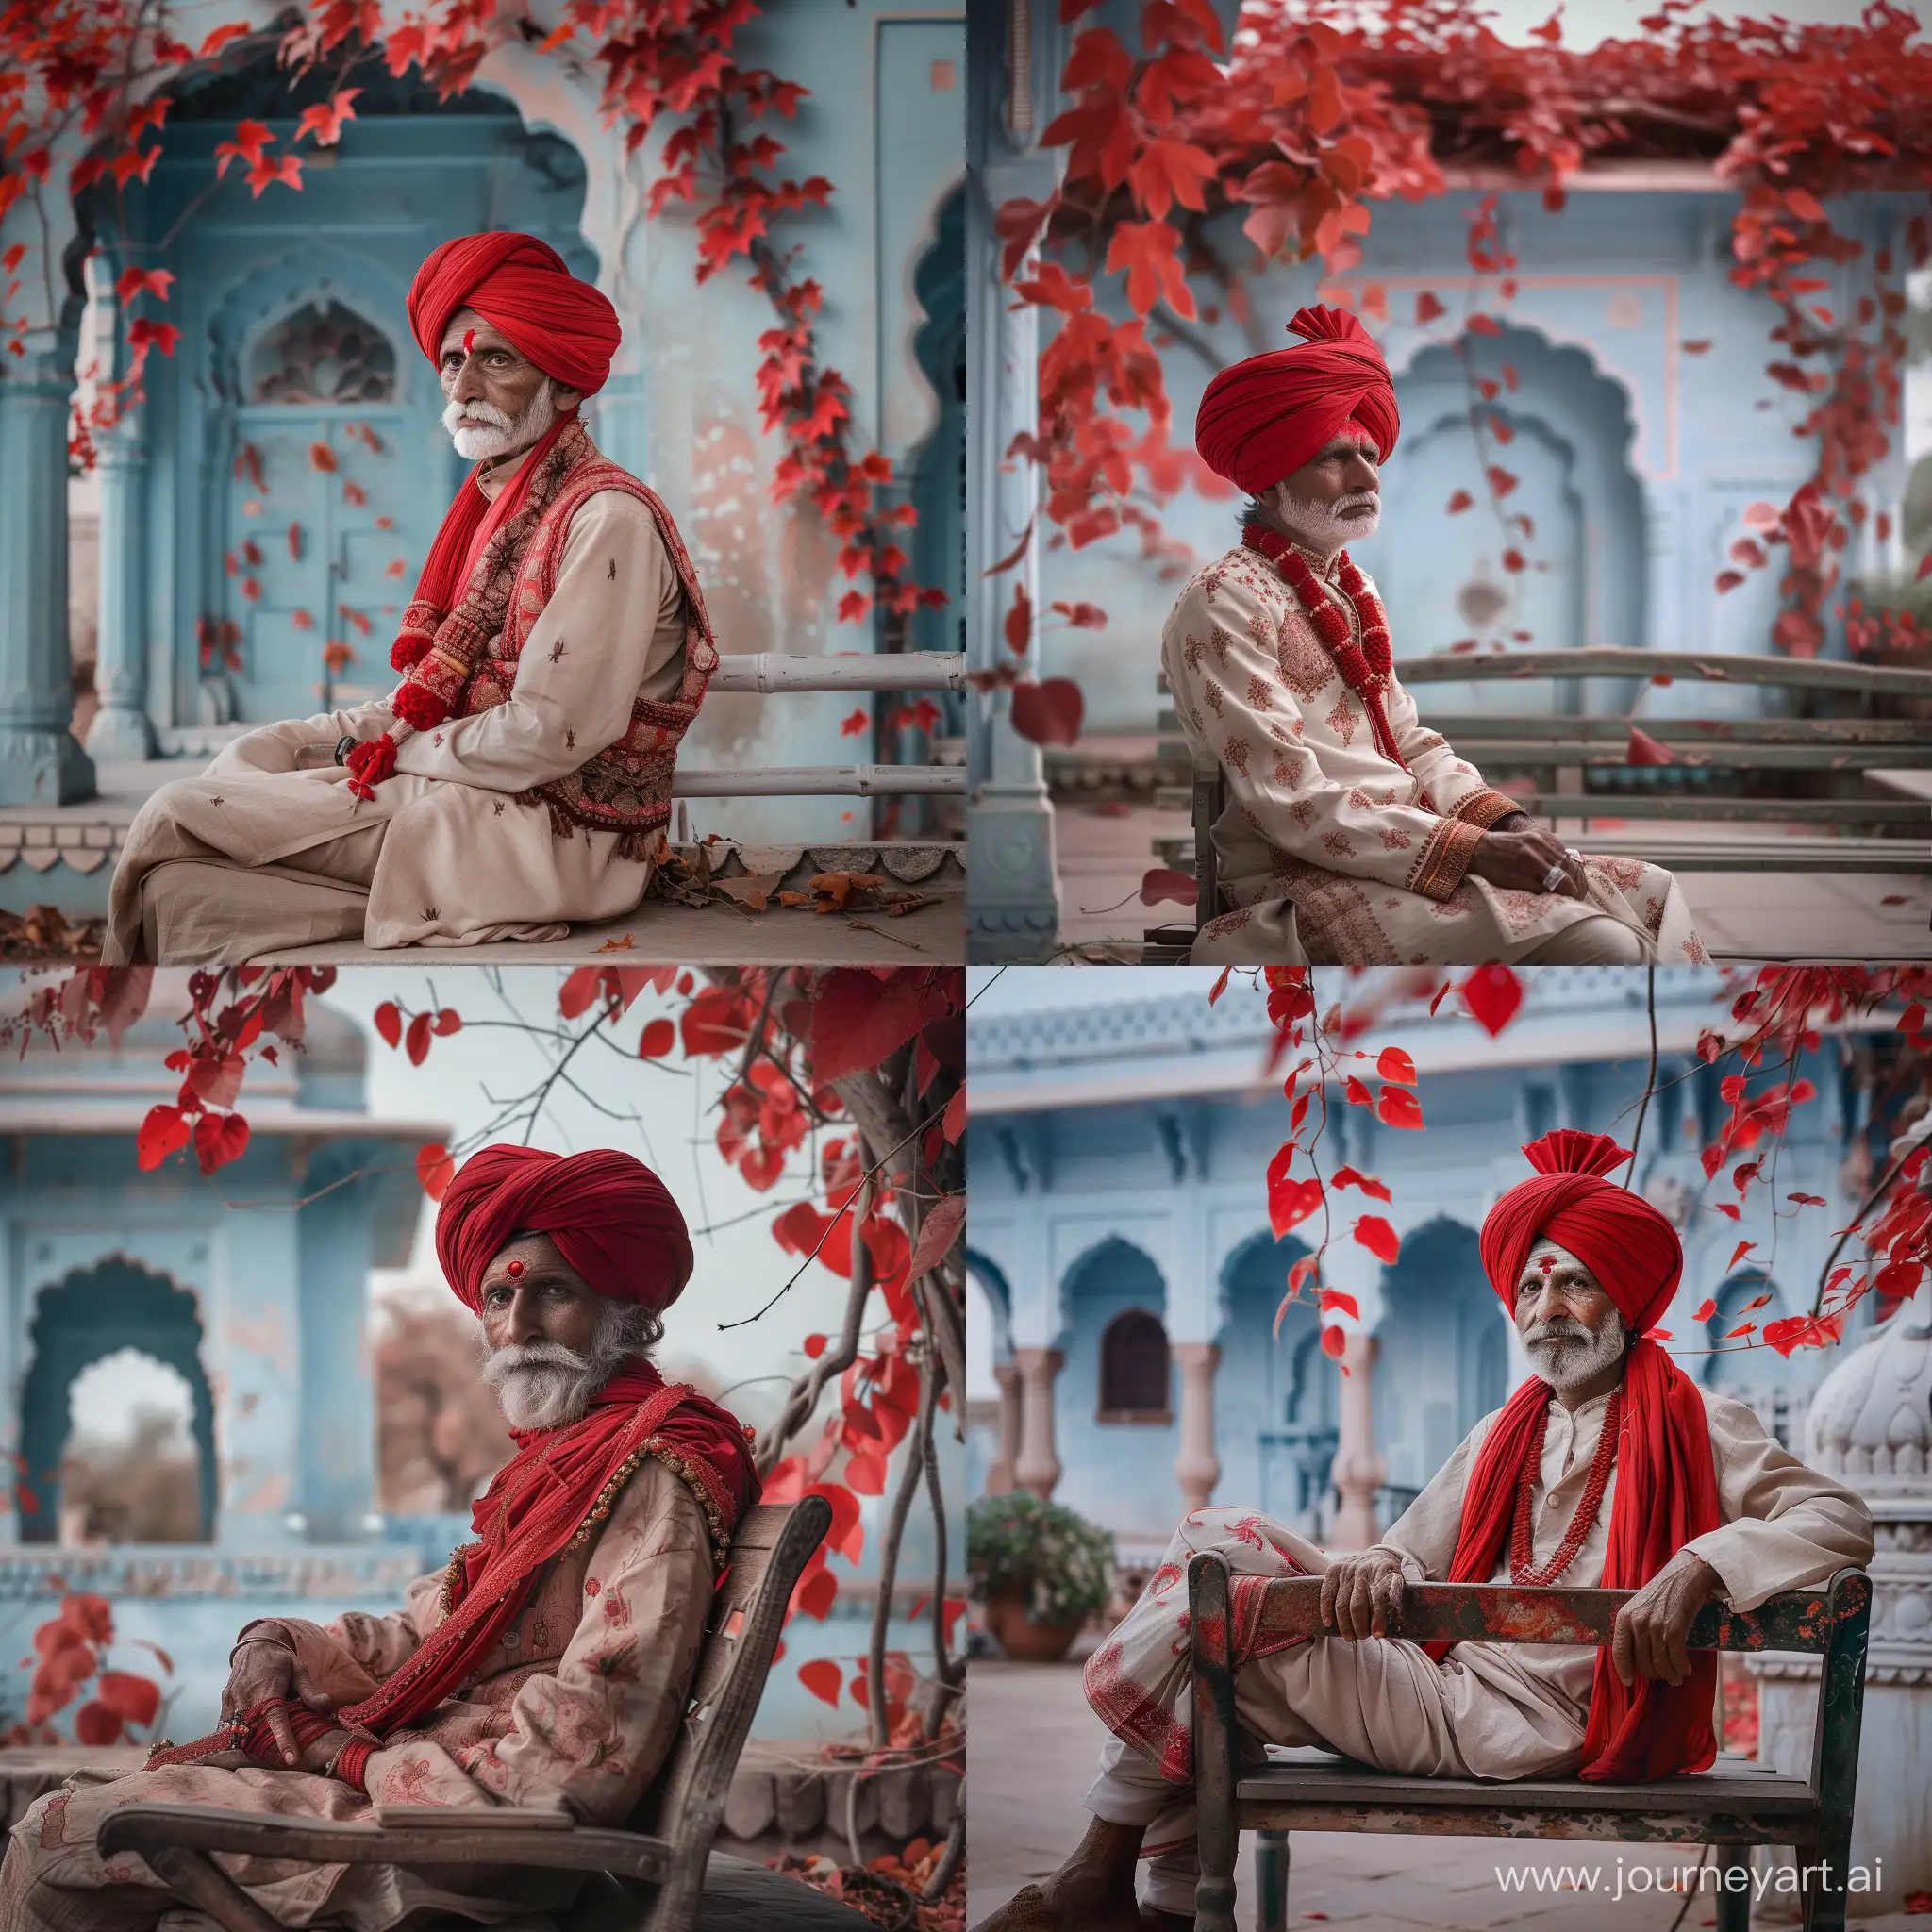 to rabaris  man70 years old whit  red turbans and tradional clothing sitting on a bench  in the back ground a light bleu old palace witn red leaves climbing plant  soft light and contrast  50 mm fuji xt4   fotorealistisch